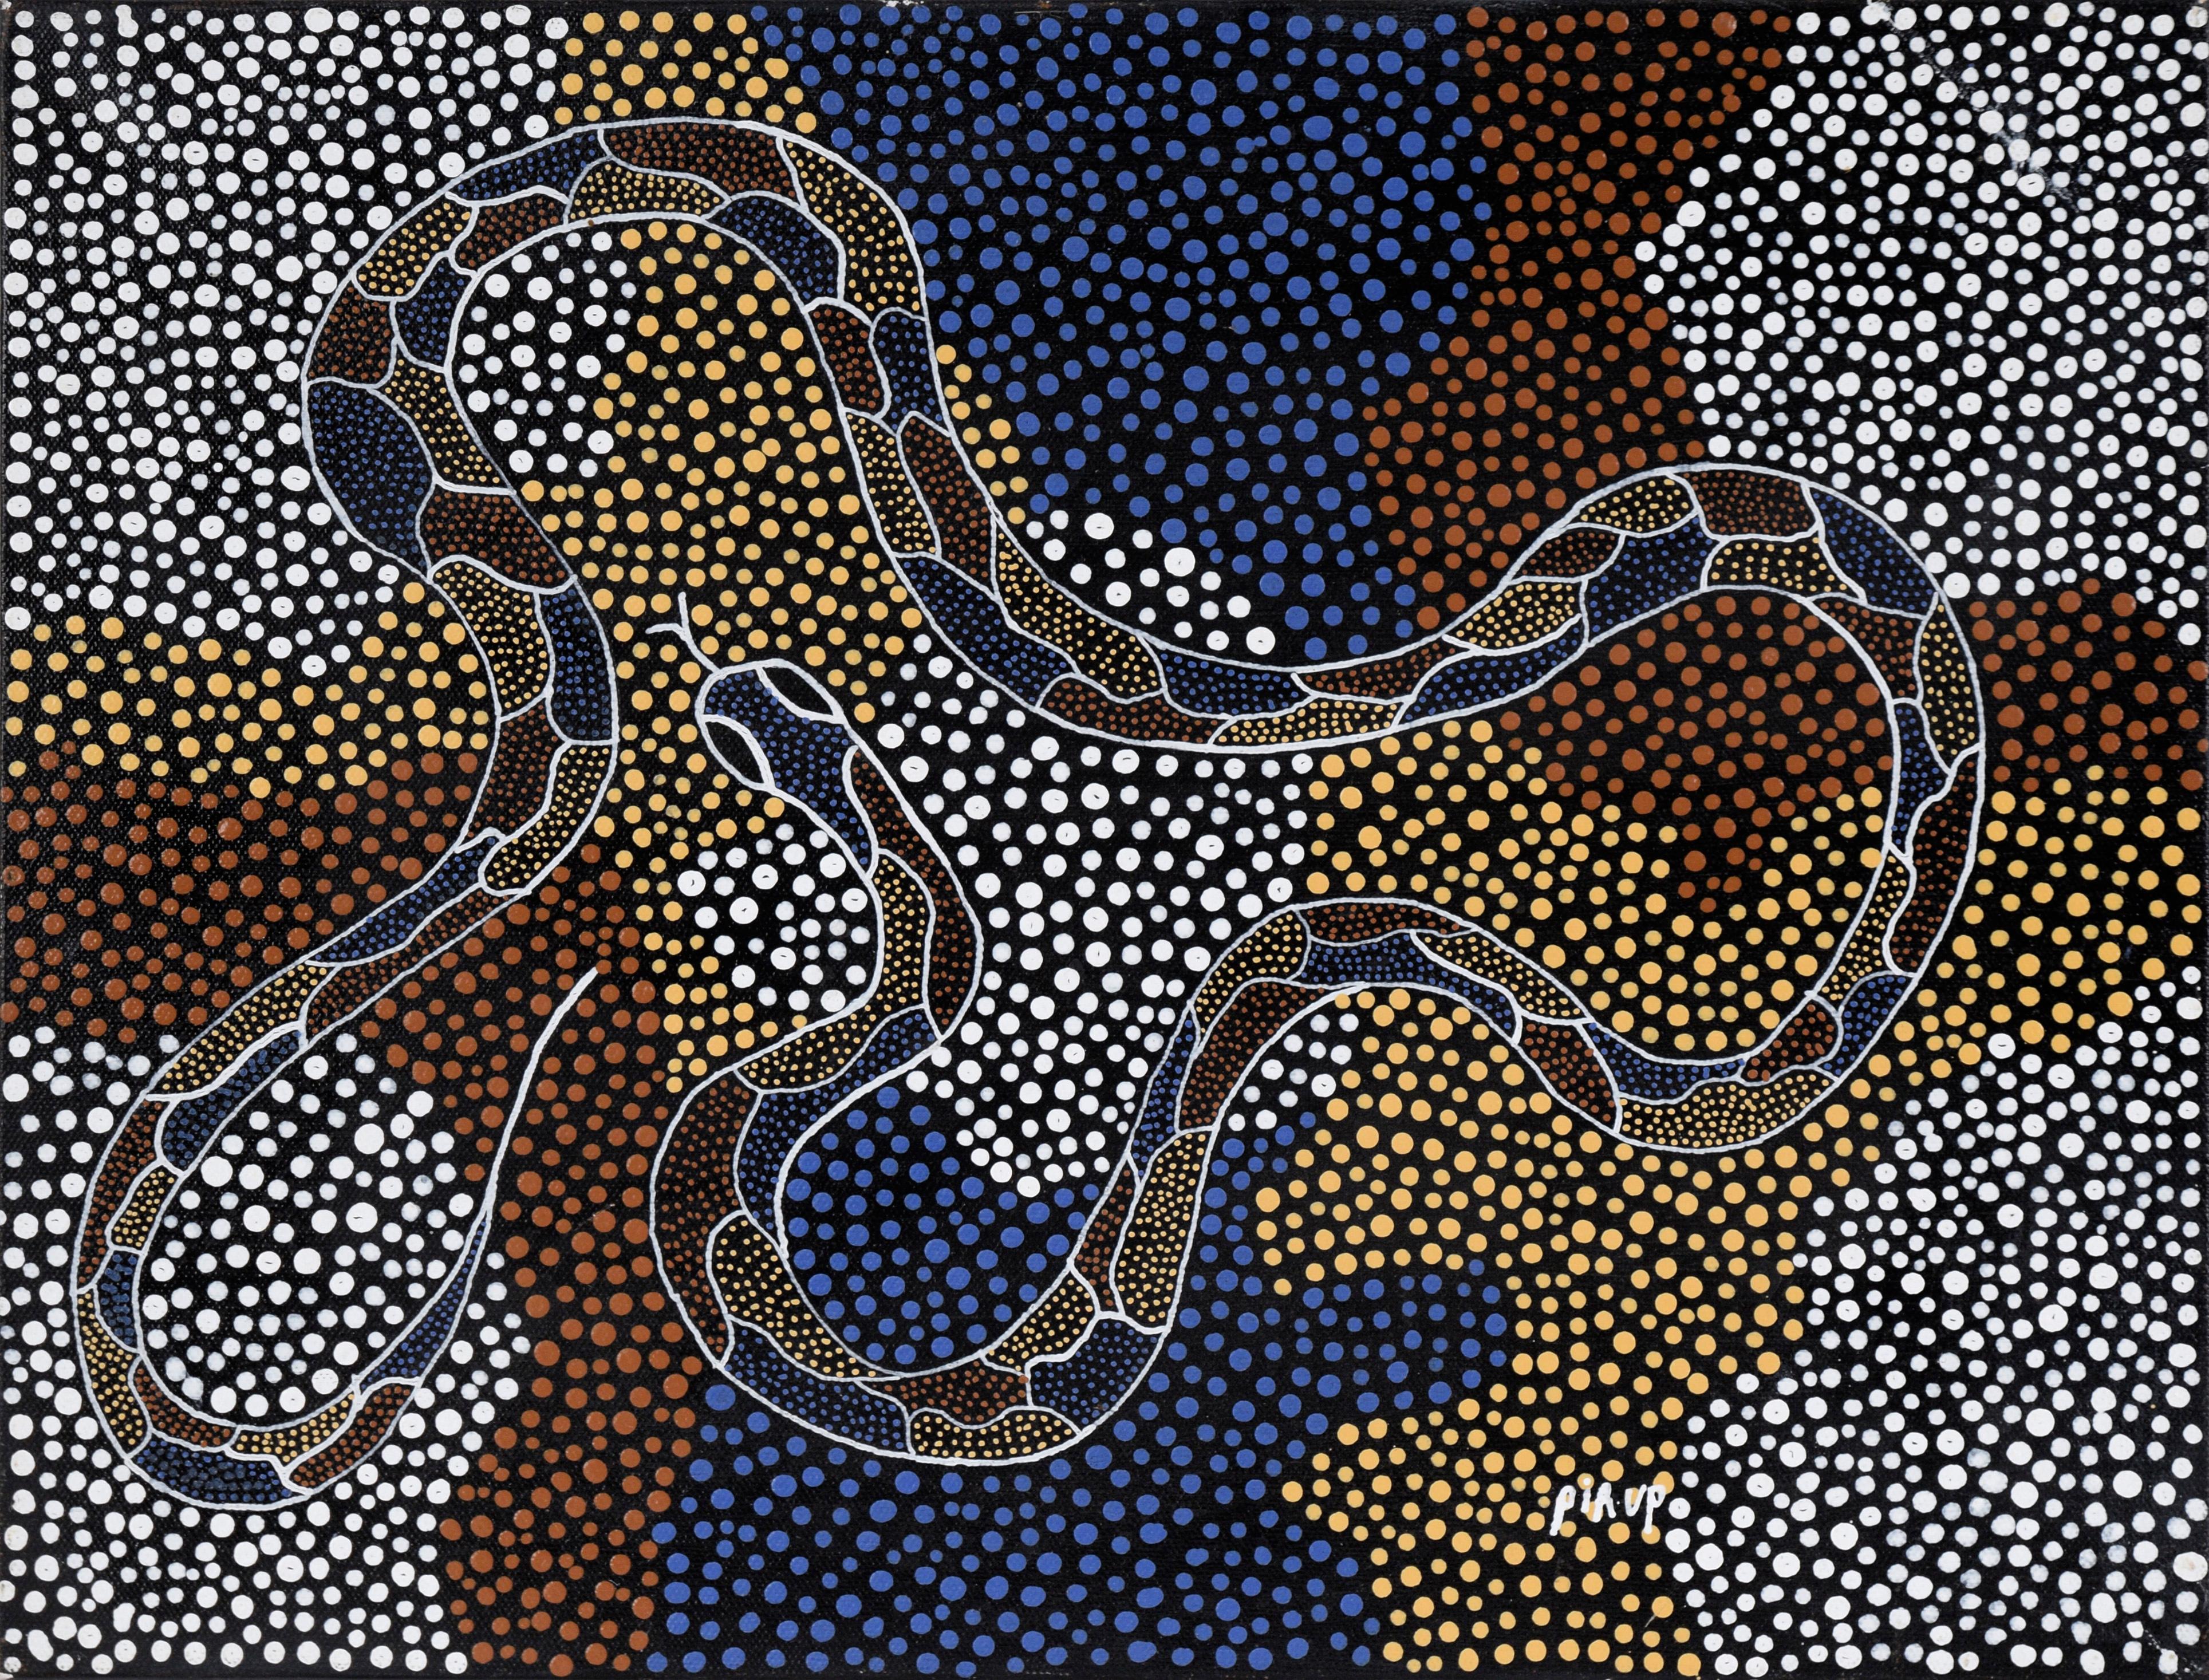 Geoffrey "Pirup" Woods Animal Painting - The Creator Serpent - Aboriginal Dot Painting in Acrylic on Canvas